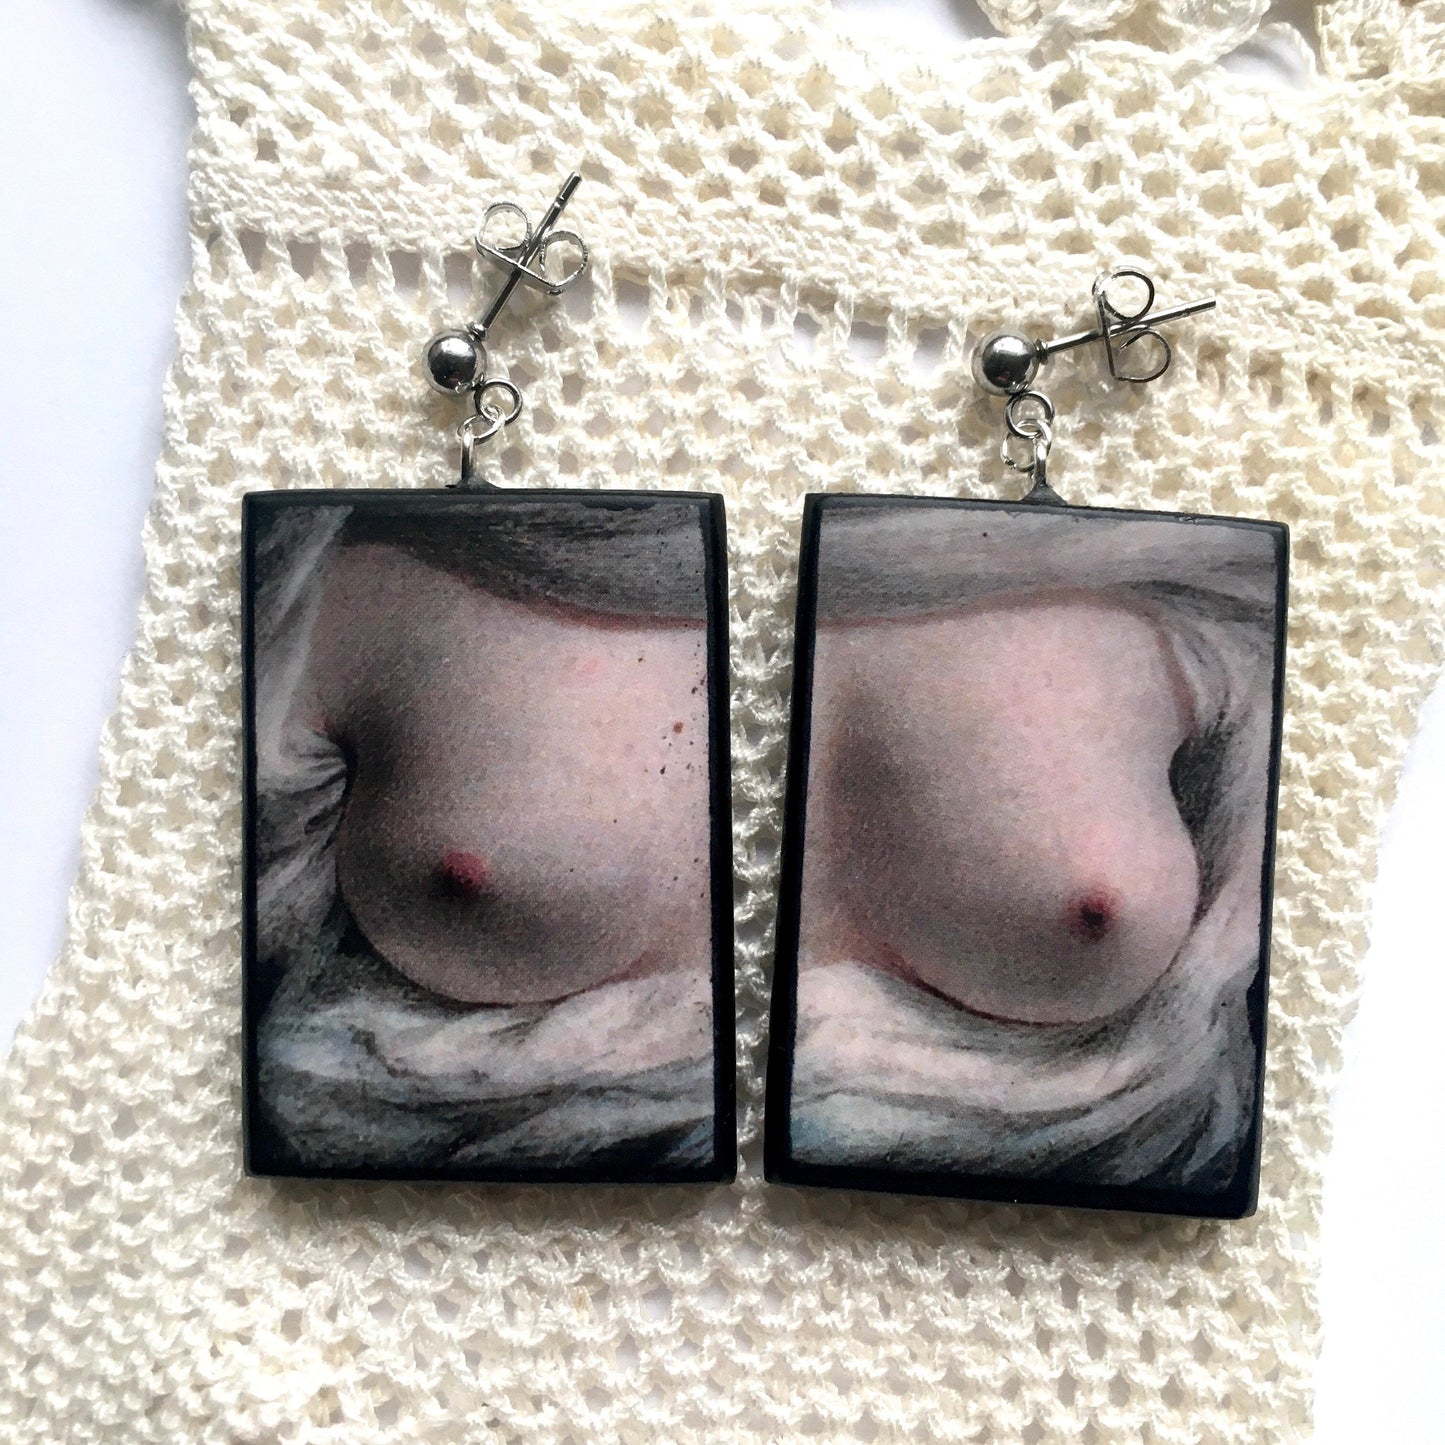 Sustainable wooden handmade stud earrings inspired by the American artist Sarah Goodridge and her miniature painting Beauty Revealed. Obljewellery mismatched earrings